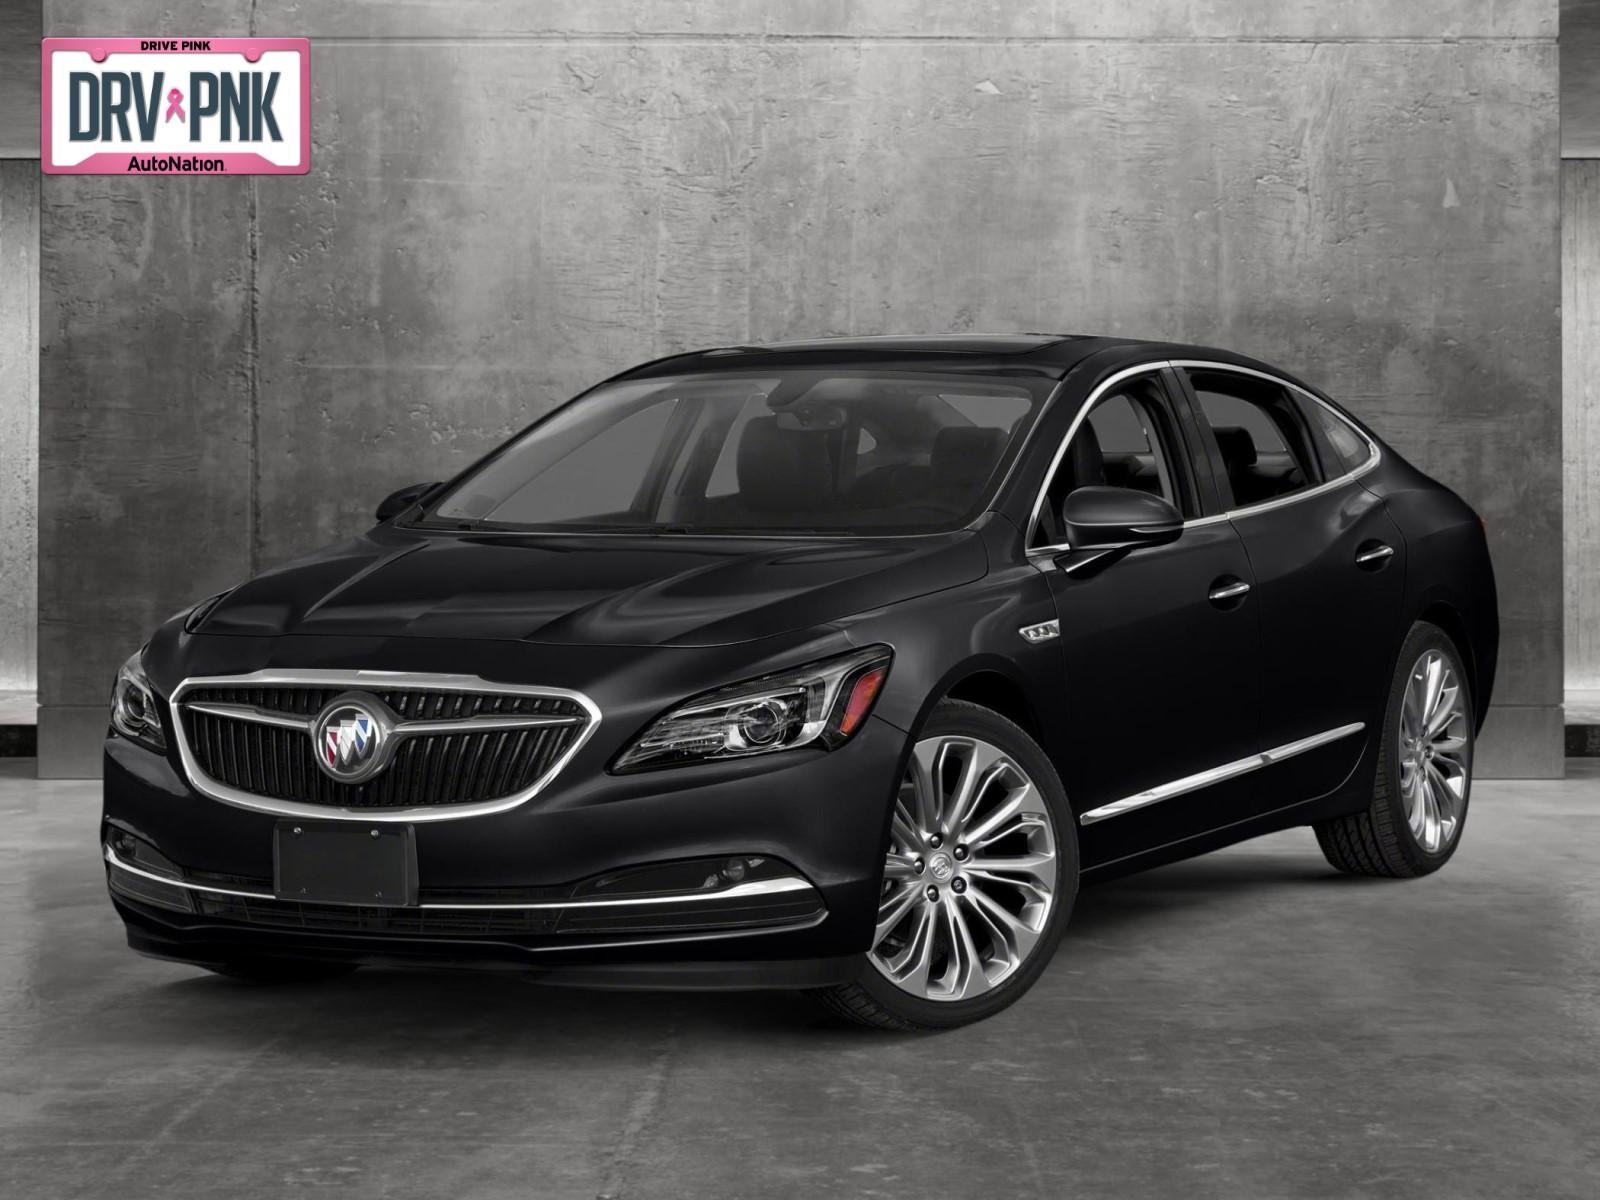 2019 Buick LaCrosse Vehicle Photo in Ft. Myers, FL 33907